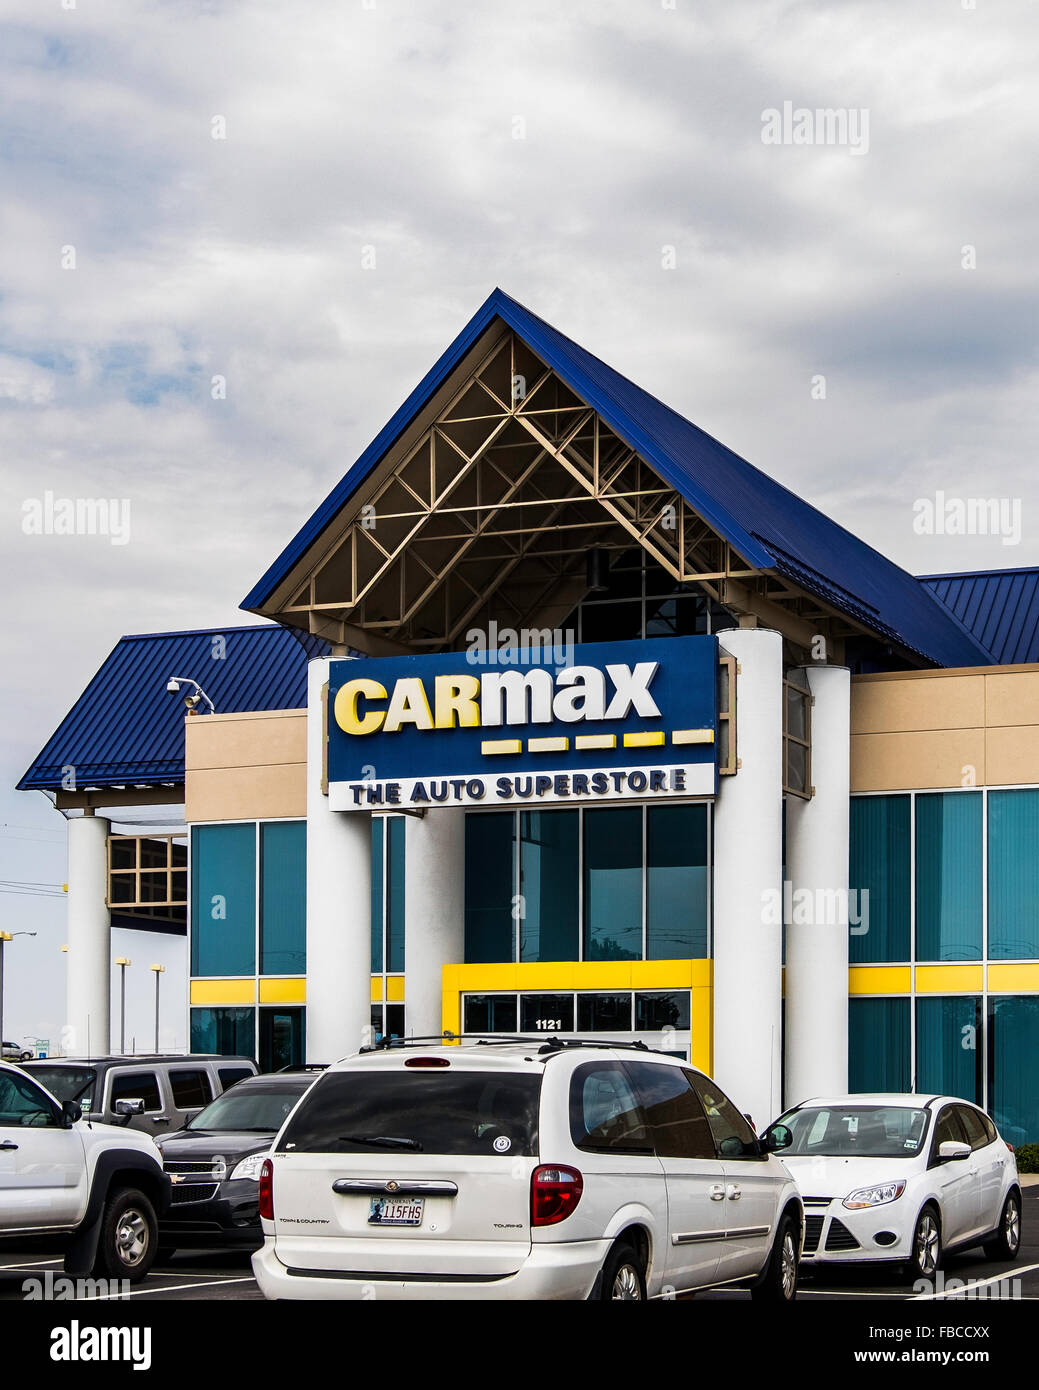 The storefront of CarMax, a used car retailer in Edmond, Oklahoma, USA. Stock Photo